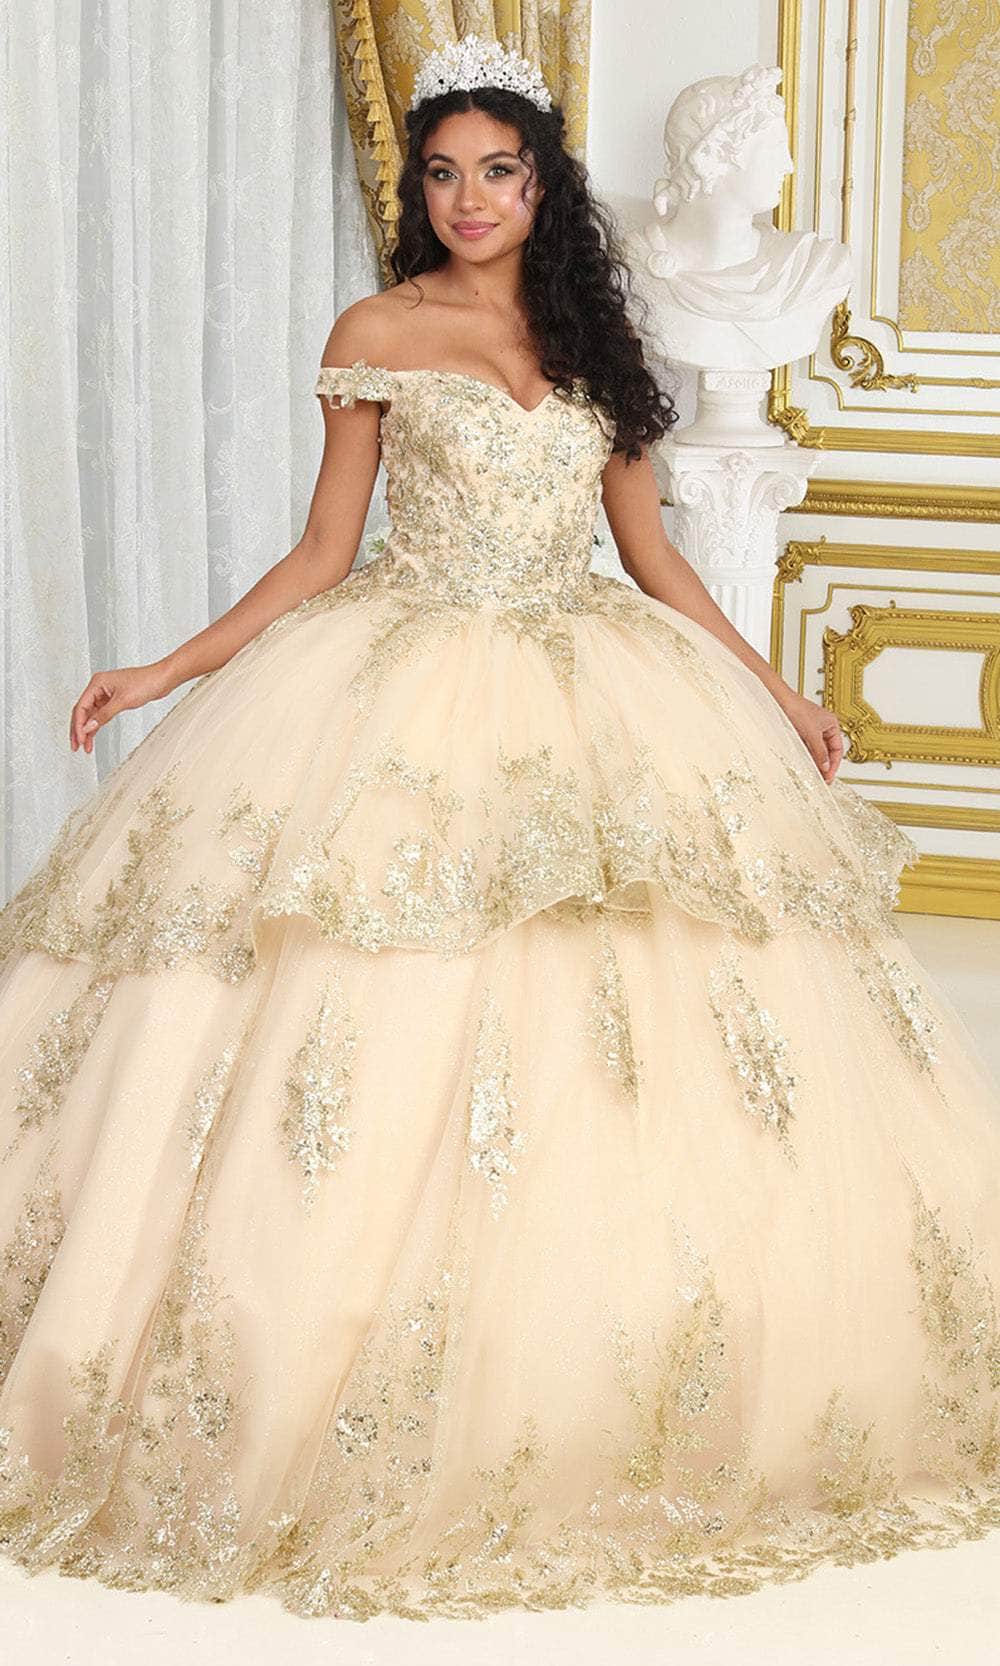 Image of May Queen LK224 - Off Shoulder Tiered Ballgown